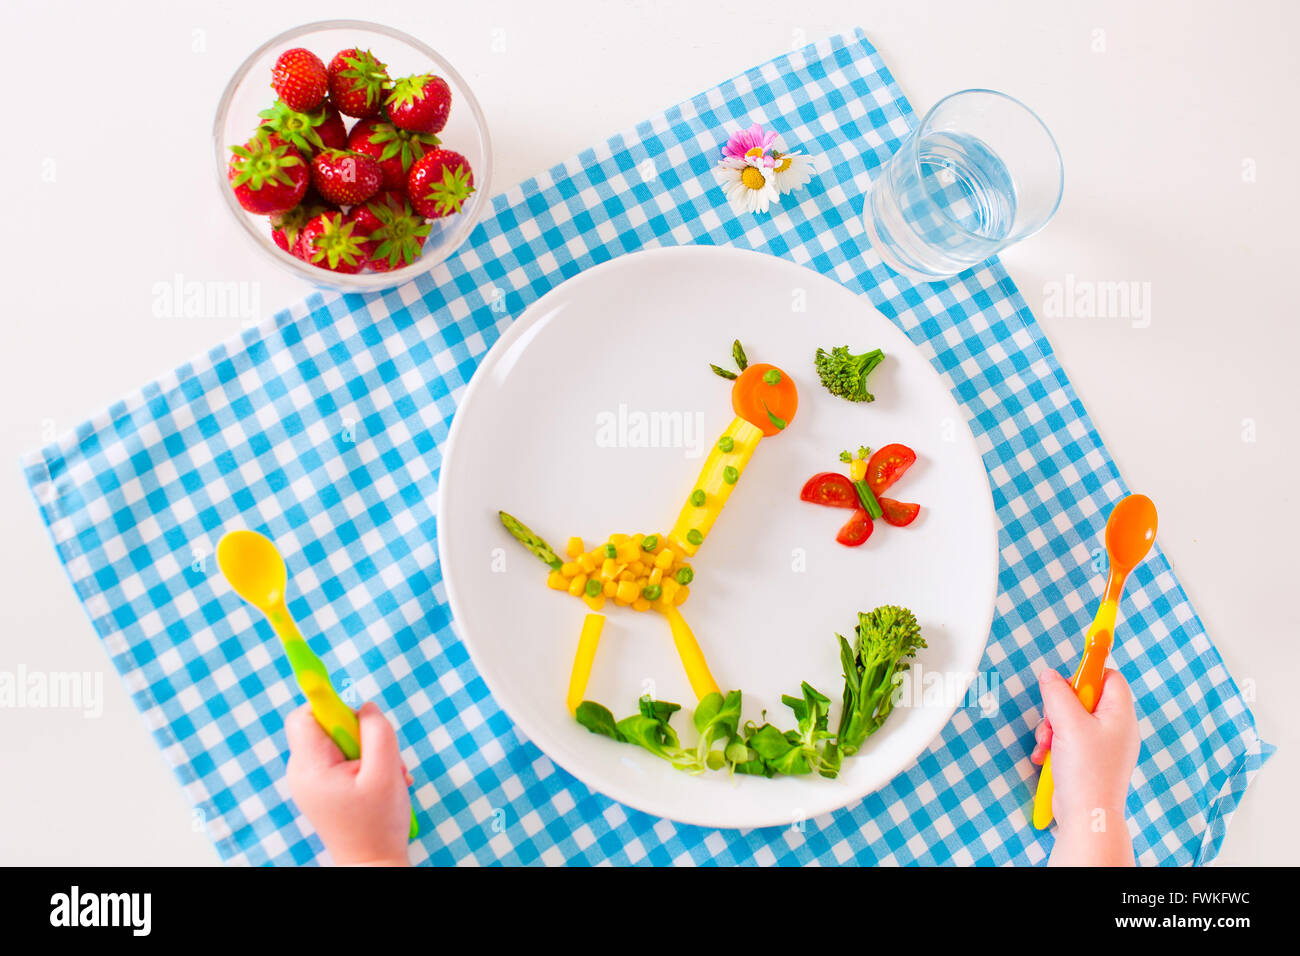 Healthy vegetarian lunch for little kids, vegetables and fruit served as animals, corn, broccoli, carrots and fresh strawberry Stock Photo